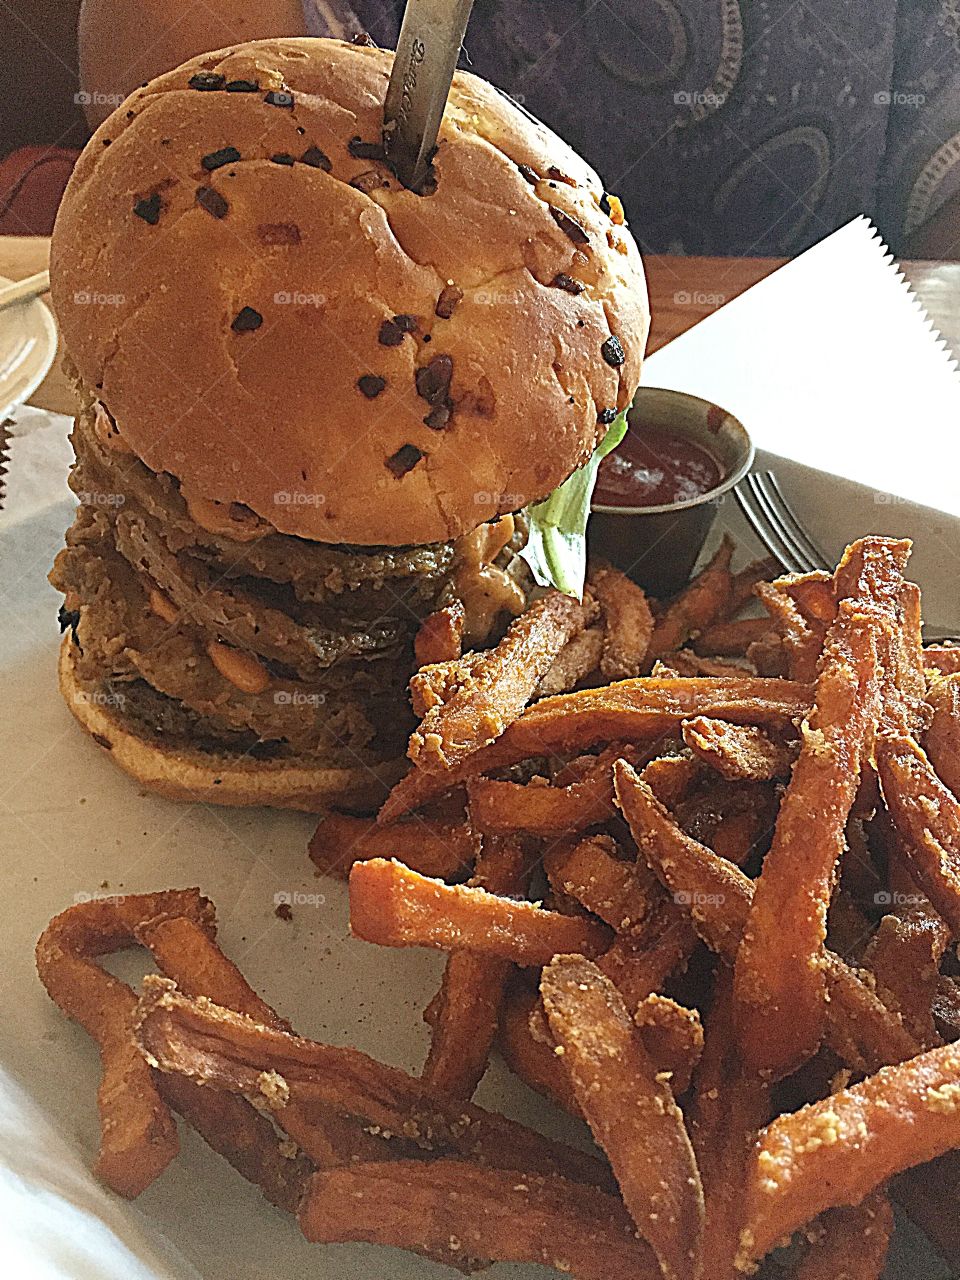 Triple burger with delicious sauces and sweet potatoes fries